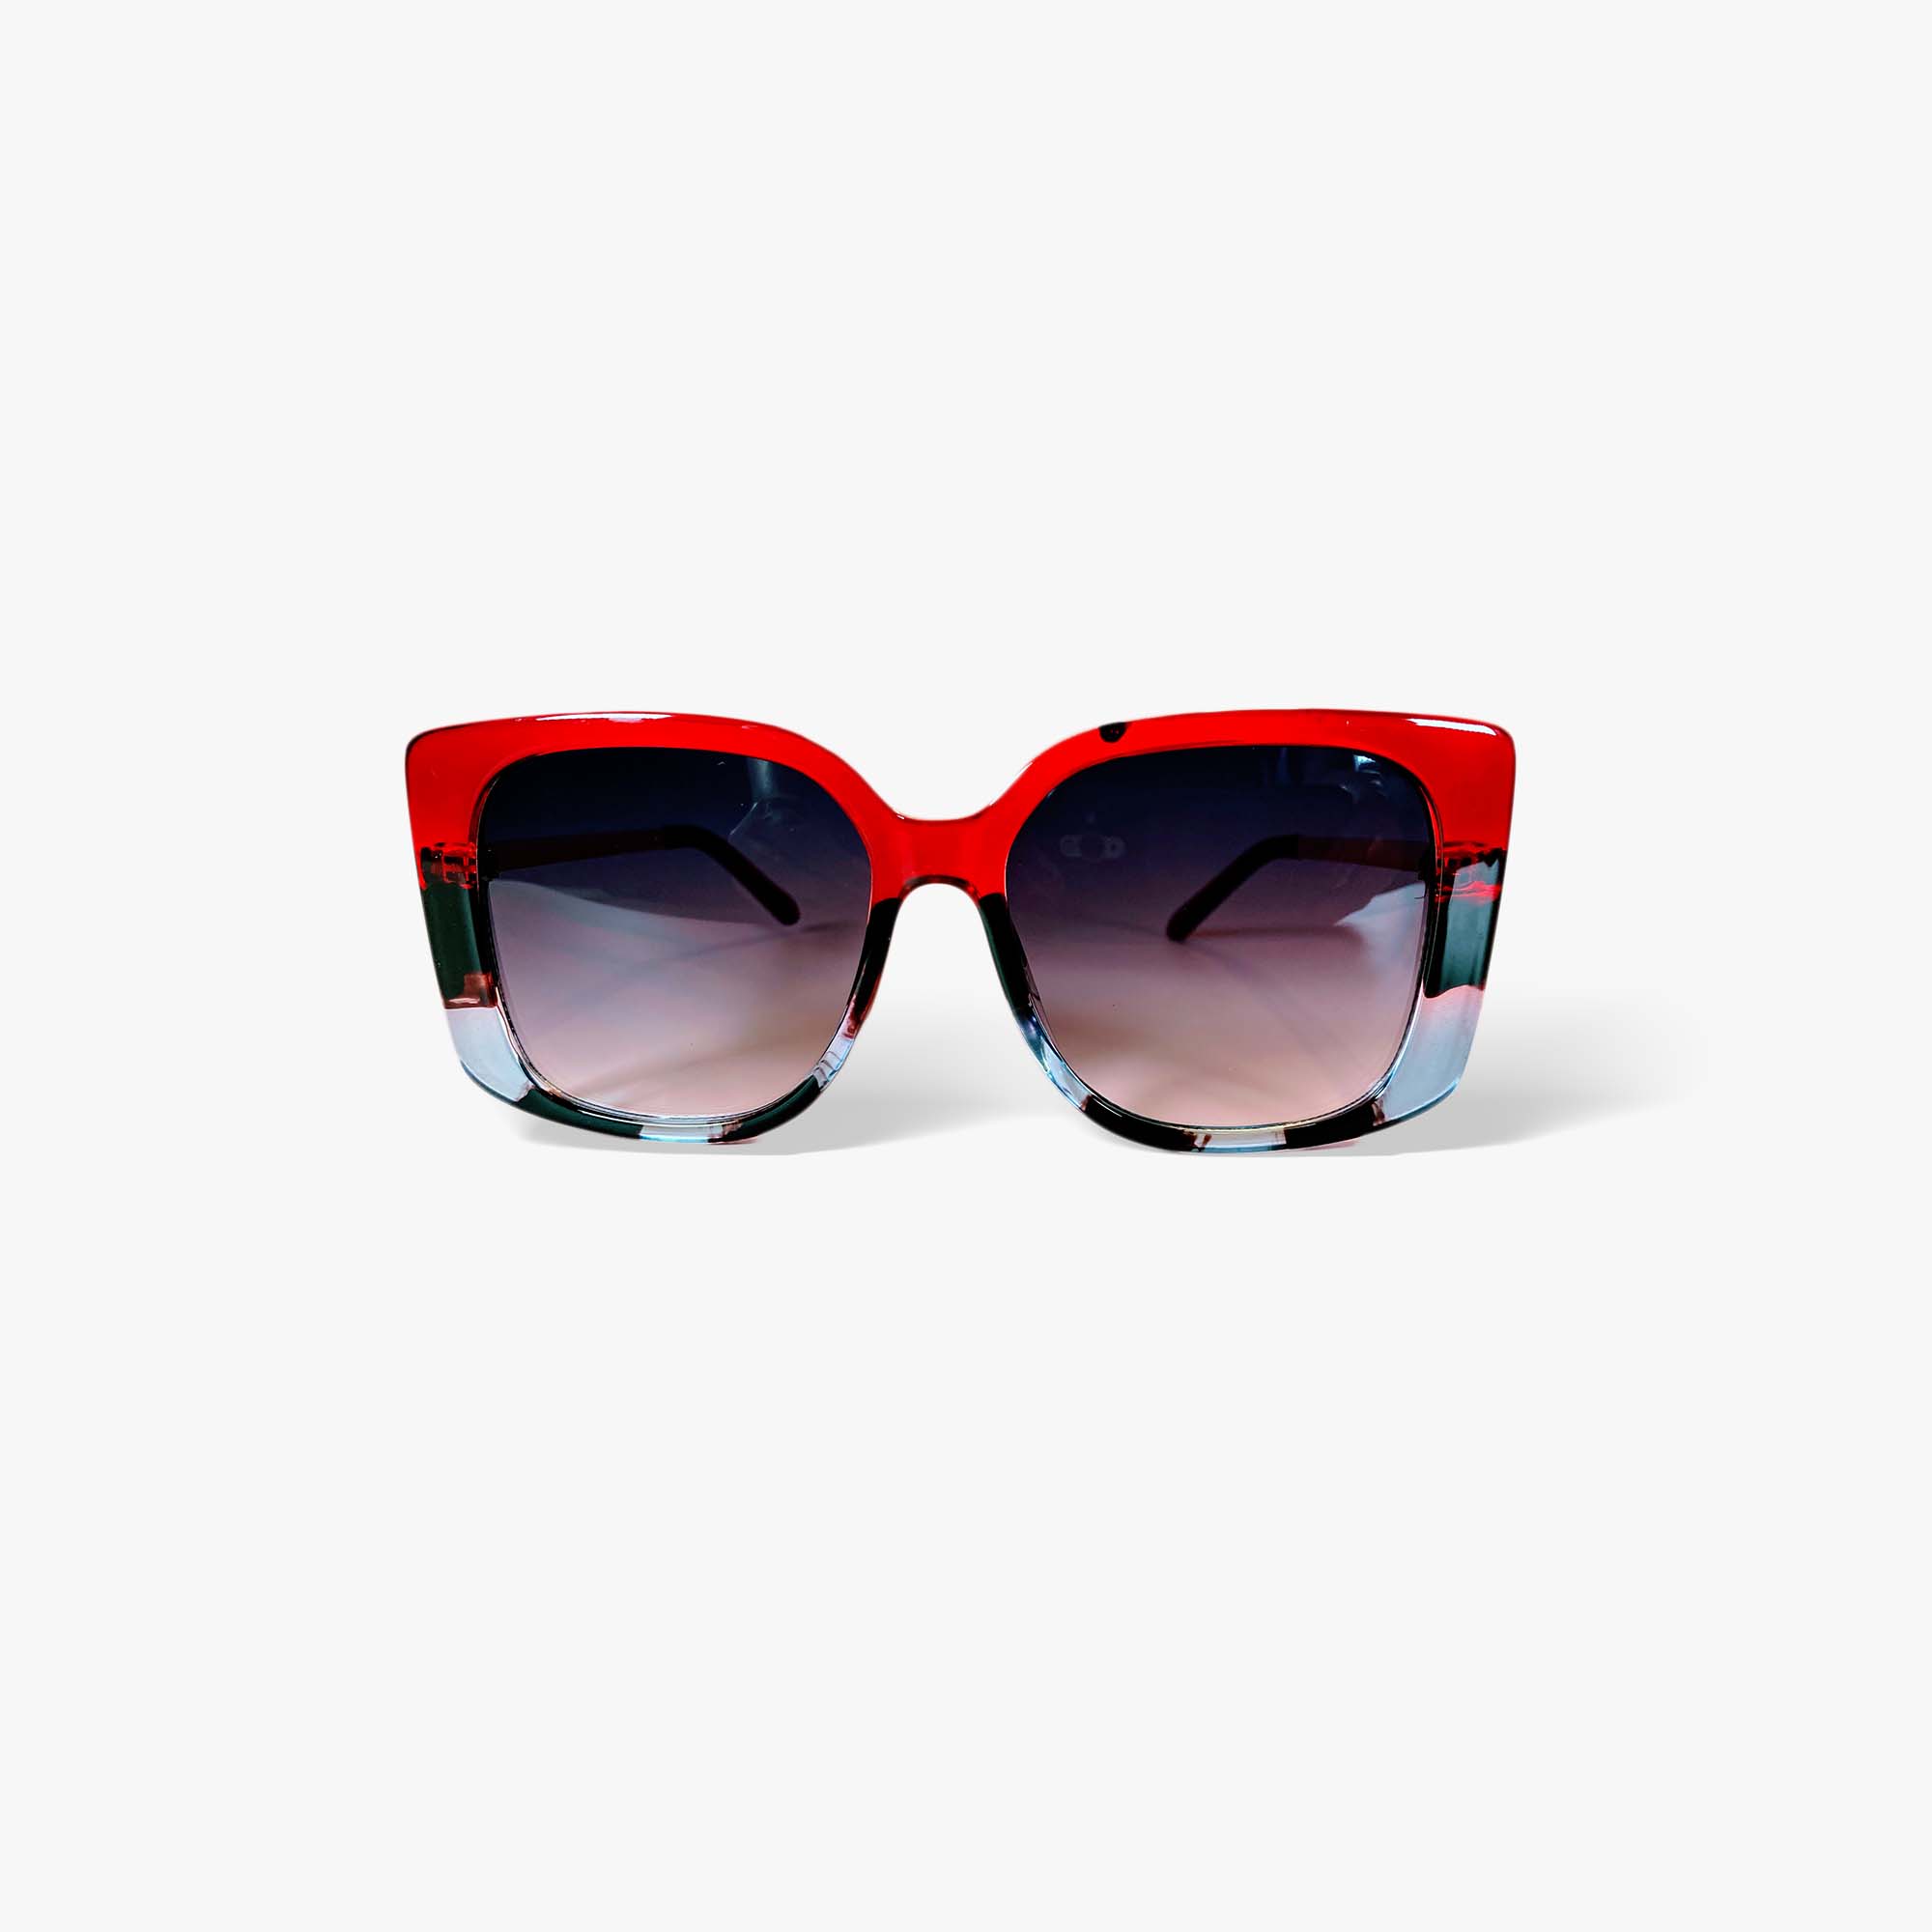 Striped Red and Blue Sunglasses